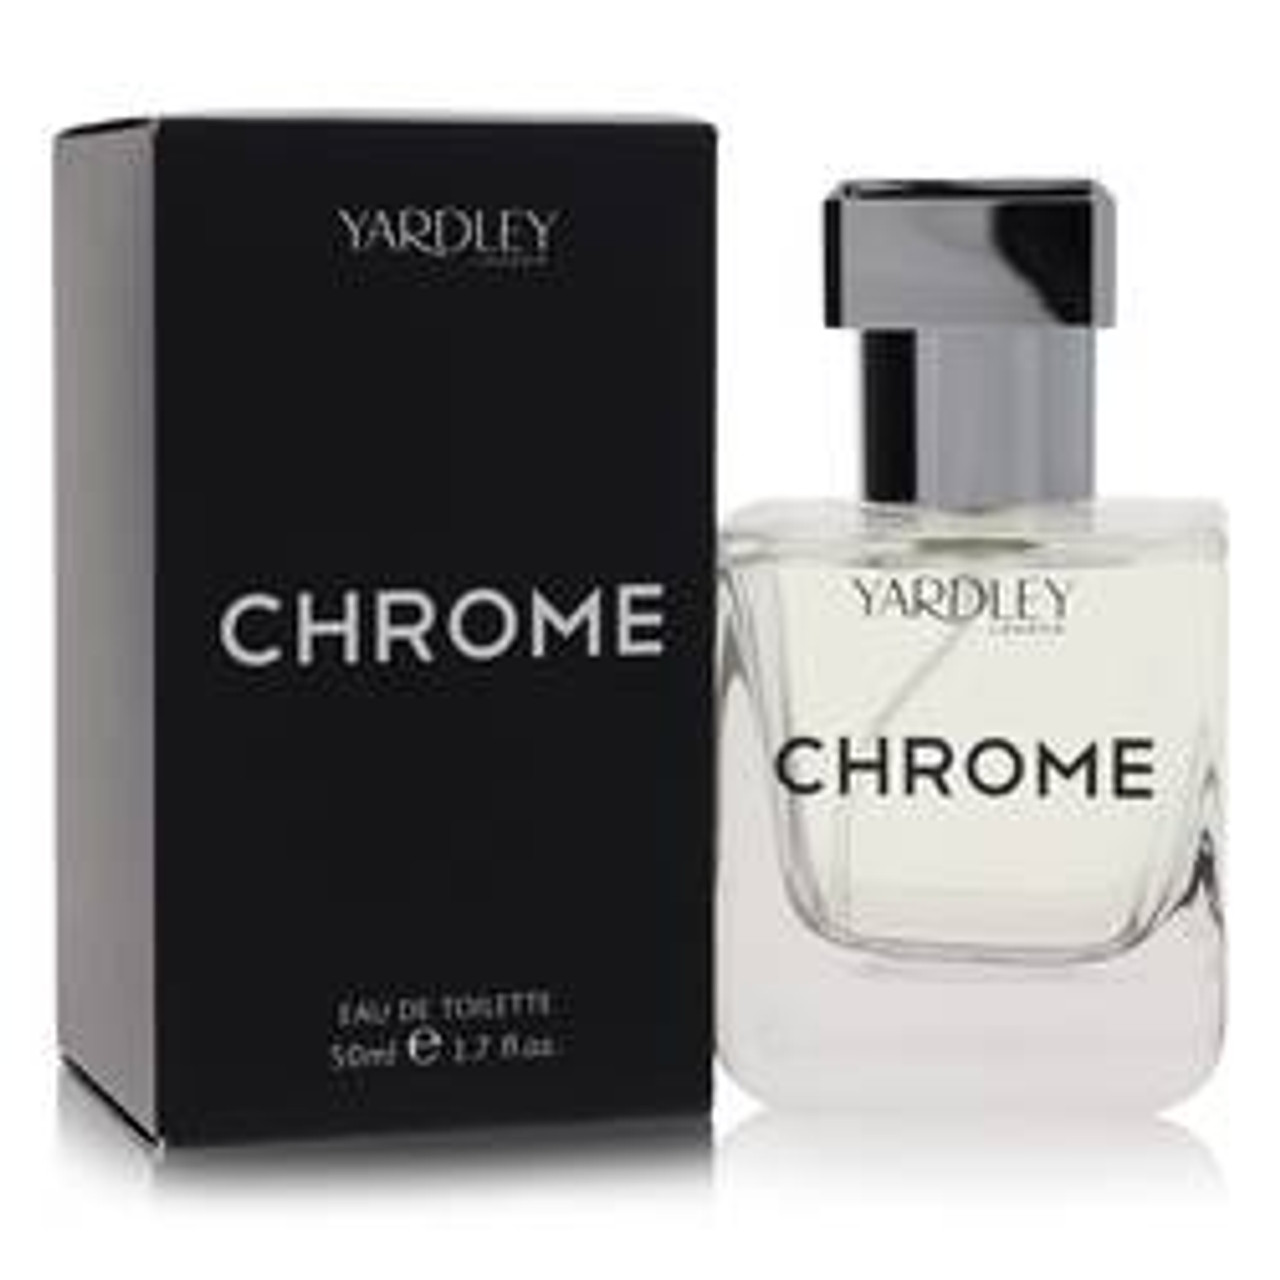 Yardley Chrome Cologne By Yardley London Eau De Toilette Spray 1.7 oz for Men - [From 50.33 - Choose pk Qty ] - *Ships from Miami